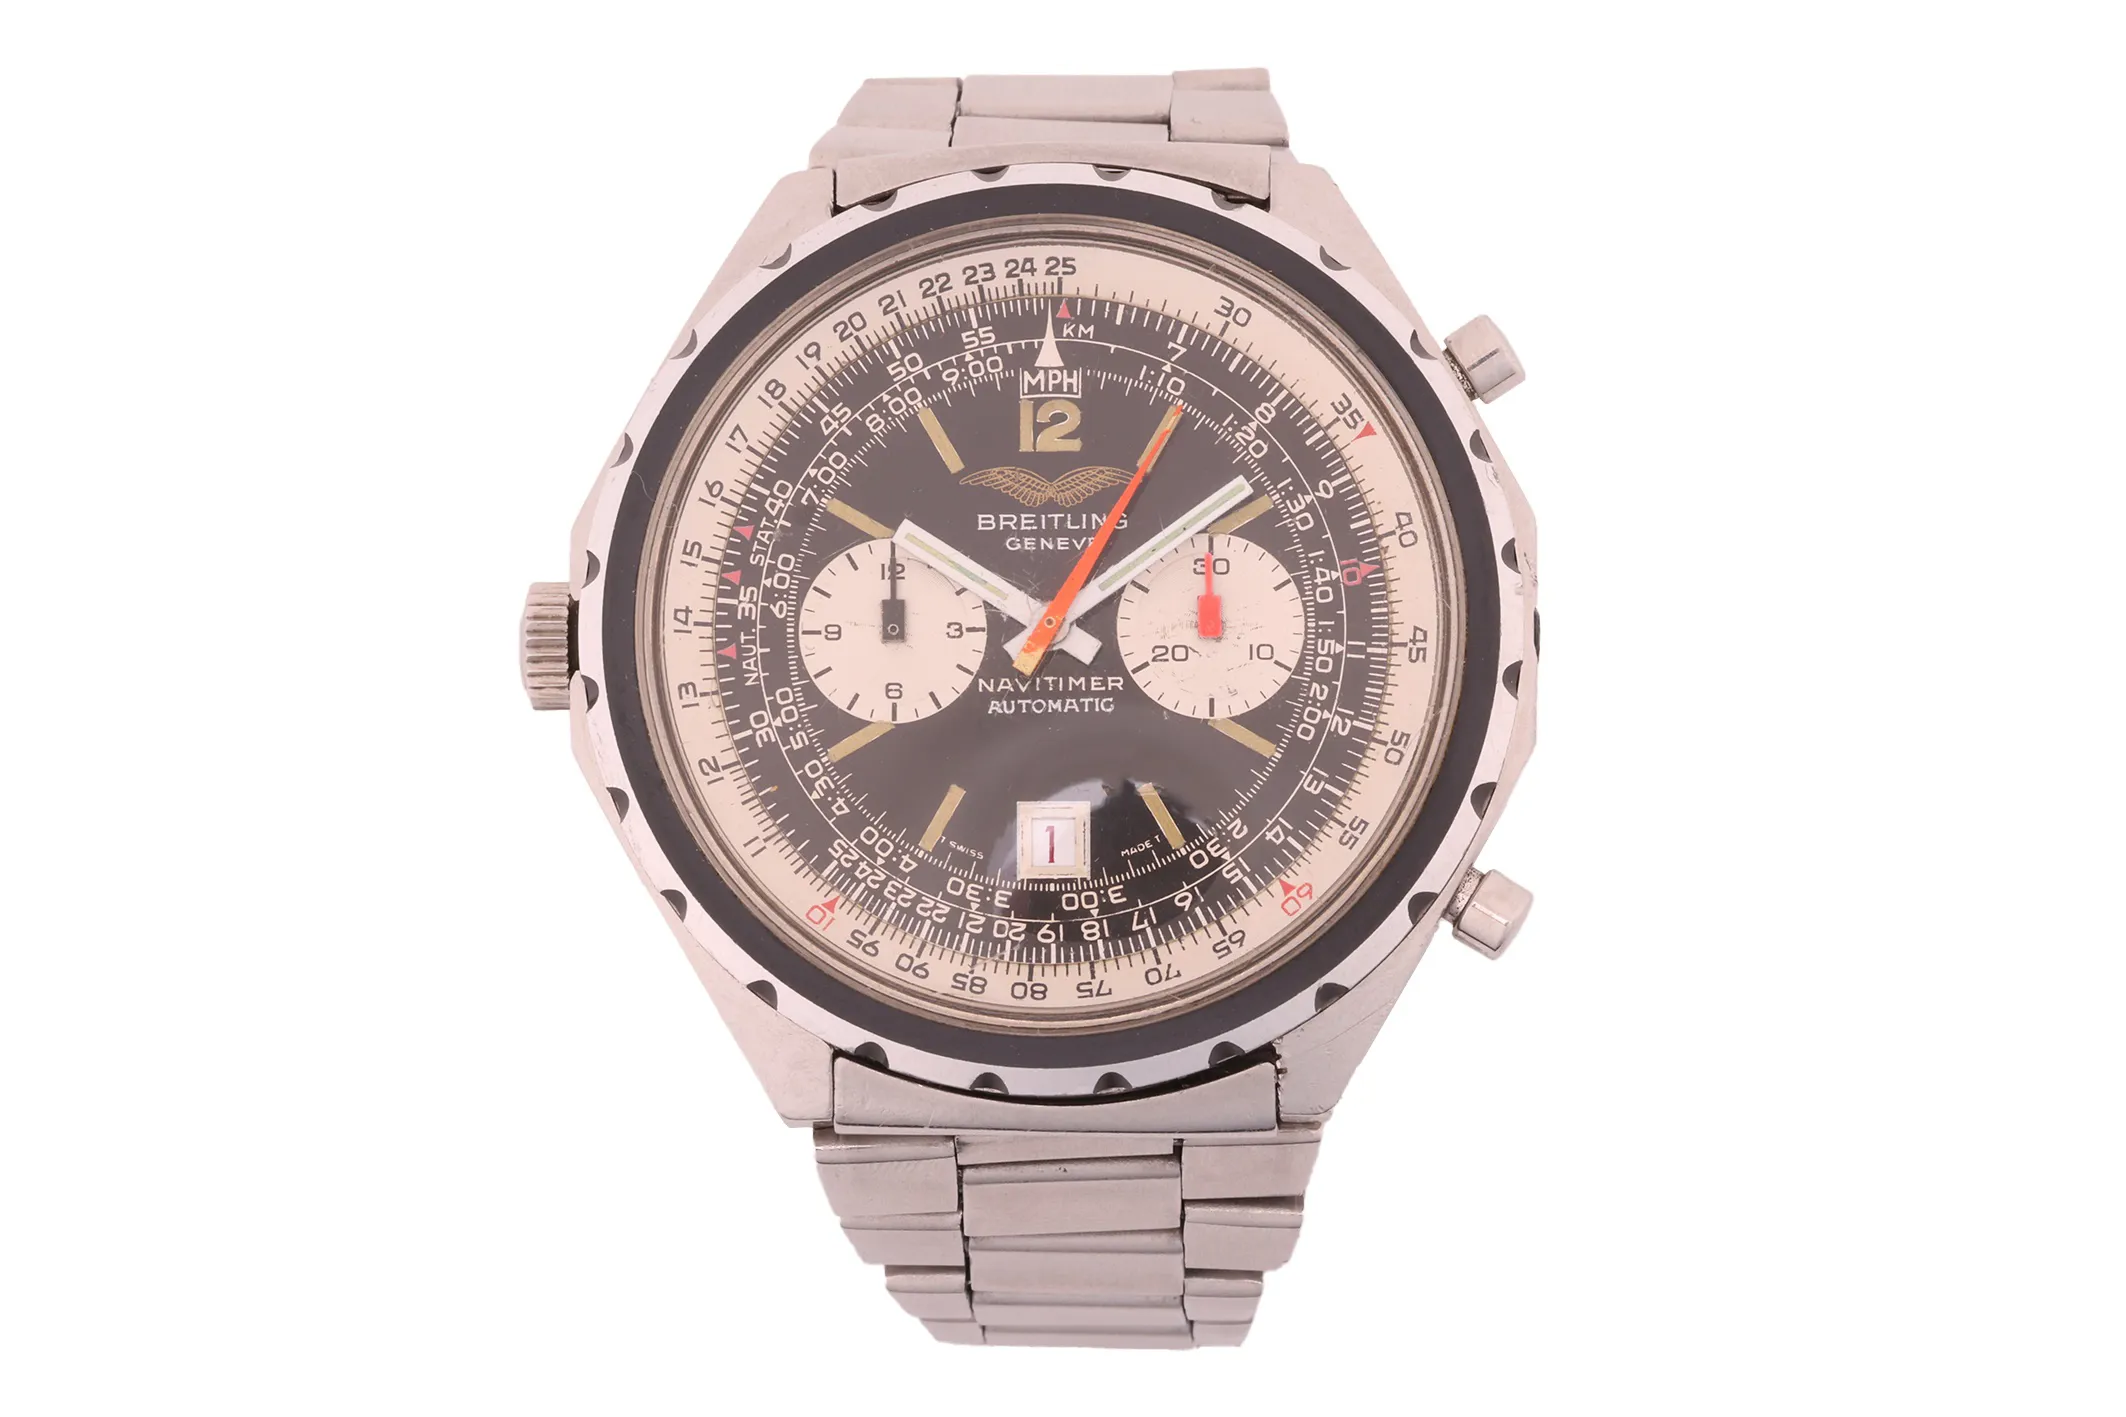 Breitling Navitimer Chrono-Matic 1806 48mm Stainless steel Black with silver